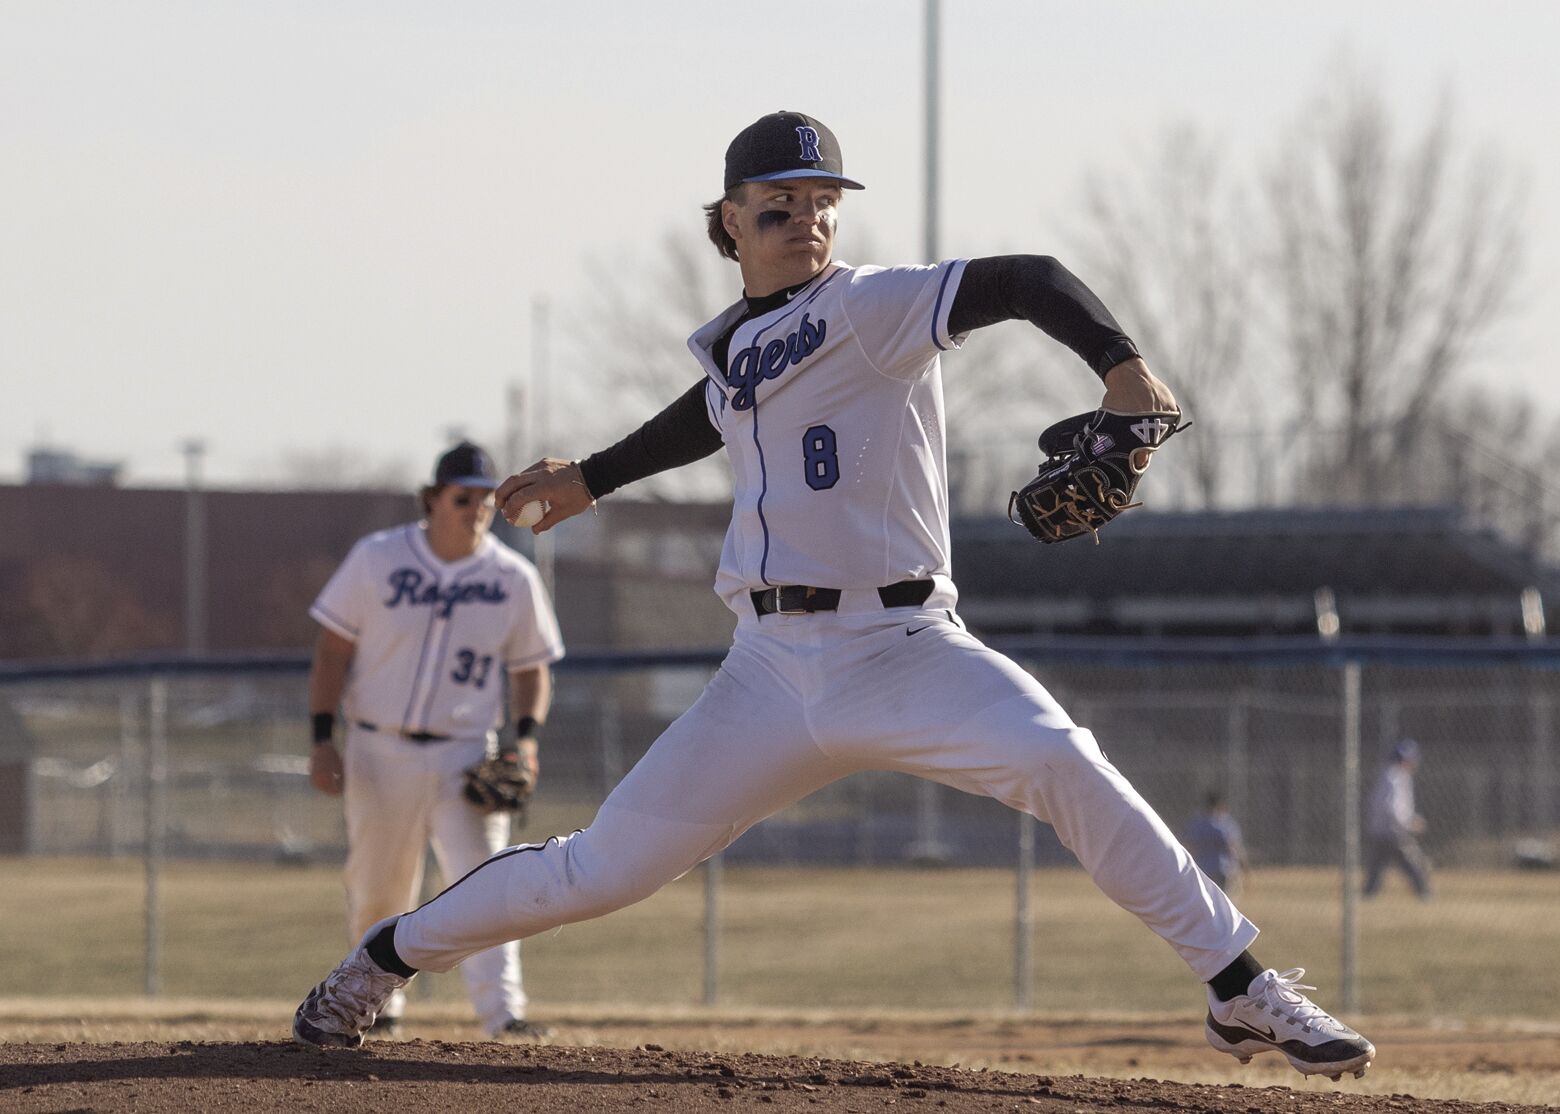 Ritter’s work ethic is contagious to Rogers baseball